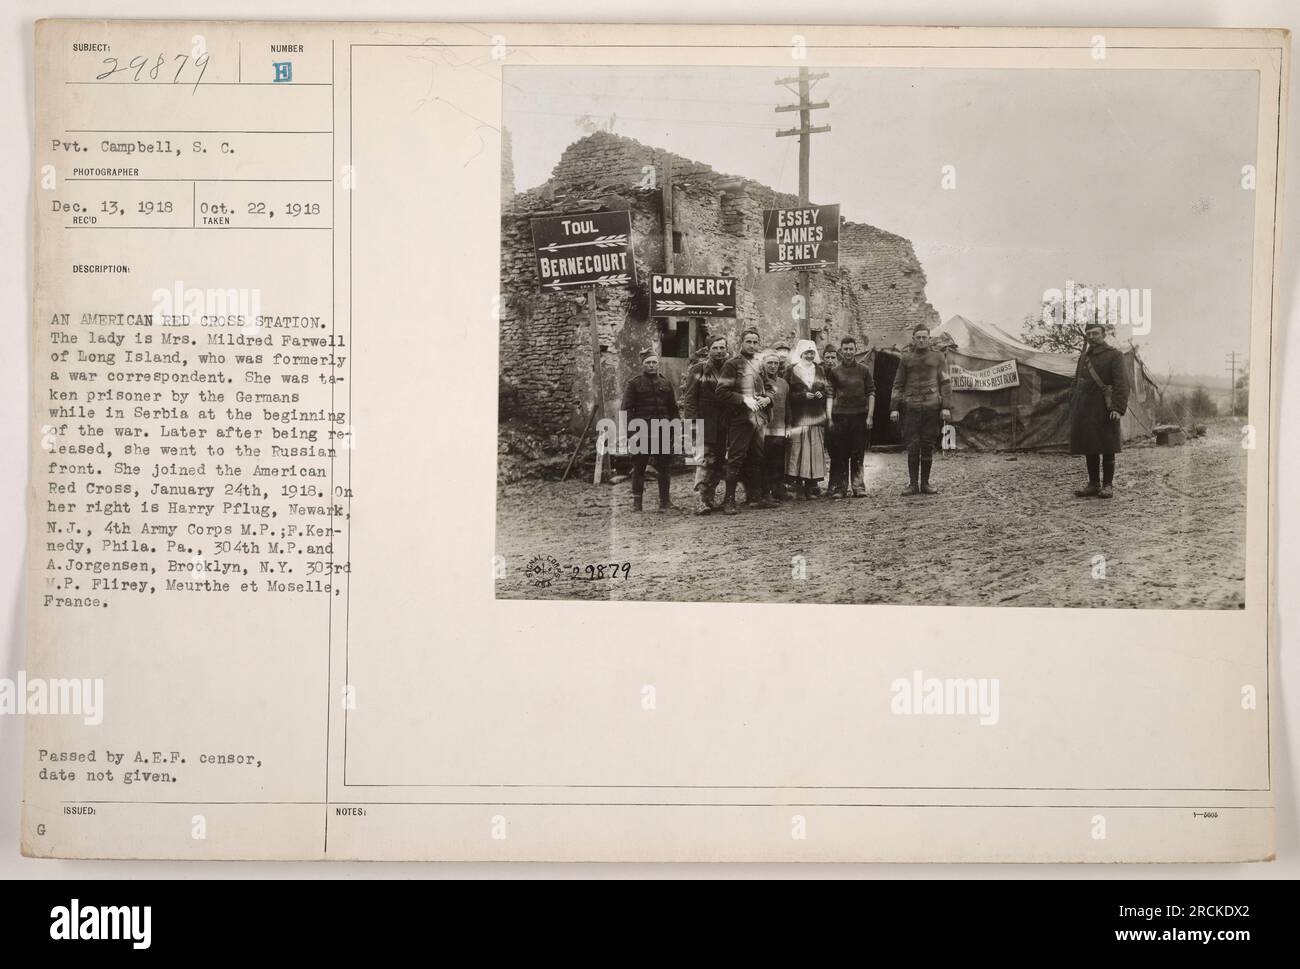 American Red Cross station in Flirey, France during World War One. The lady in the photograph is Mrs. Mildred Farwell, a former war correspondent who was taken prisoner by Germans in Serbia. She later joined the American Red Cross. Also pictured are Harry Pflug, 4th Army Corps M.P.; F.Kennedy, 304th M.P.; and A. Jorgensen, 303rd M.P. Stock Photo